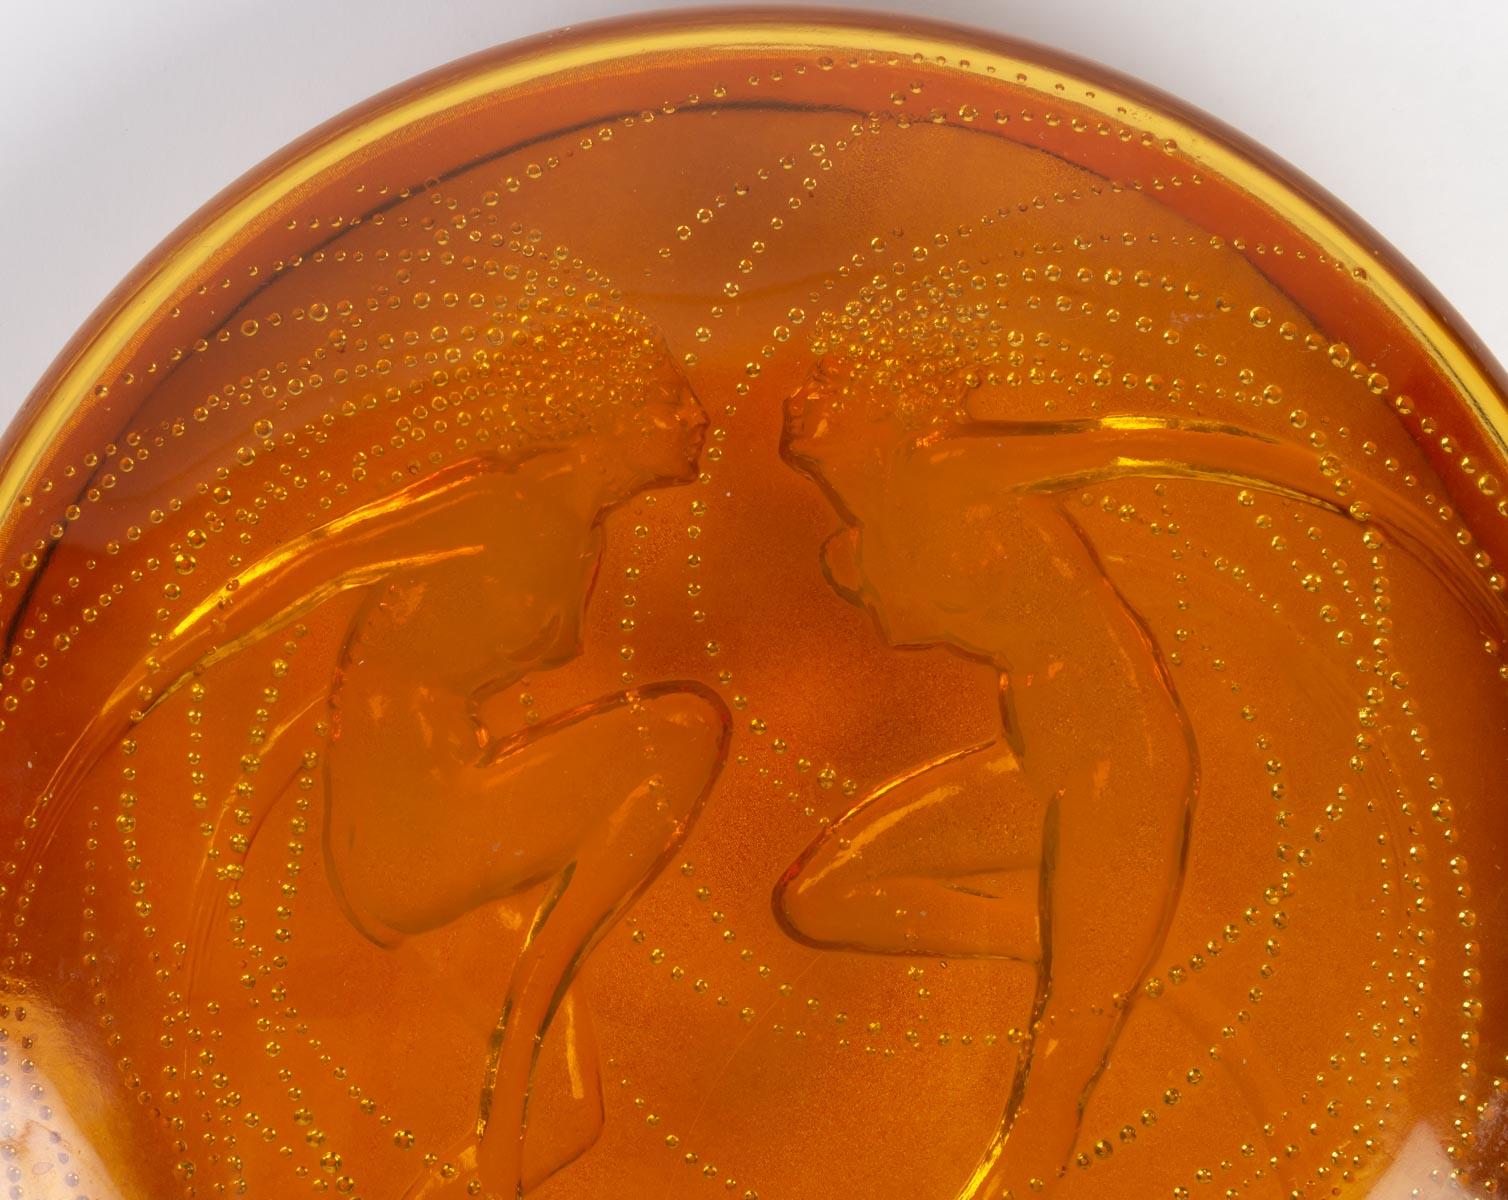 French 1921 Rene Lalique Deux Sirenes Orange Opalescent Box with Satin Base, Mermaids